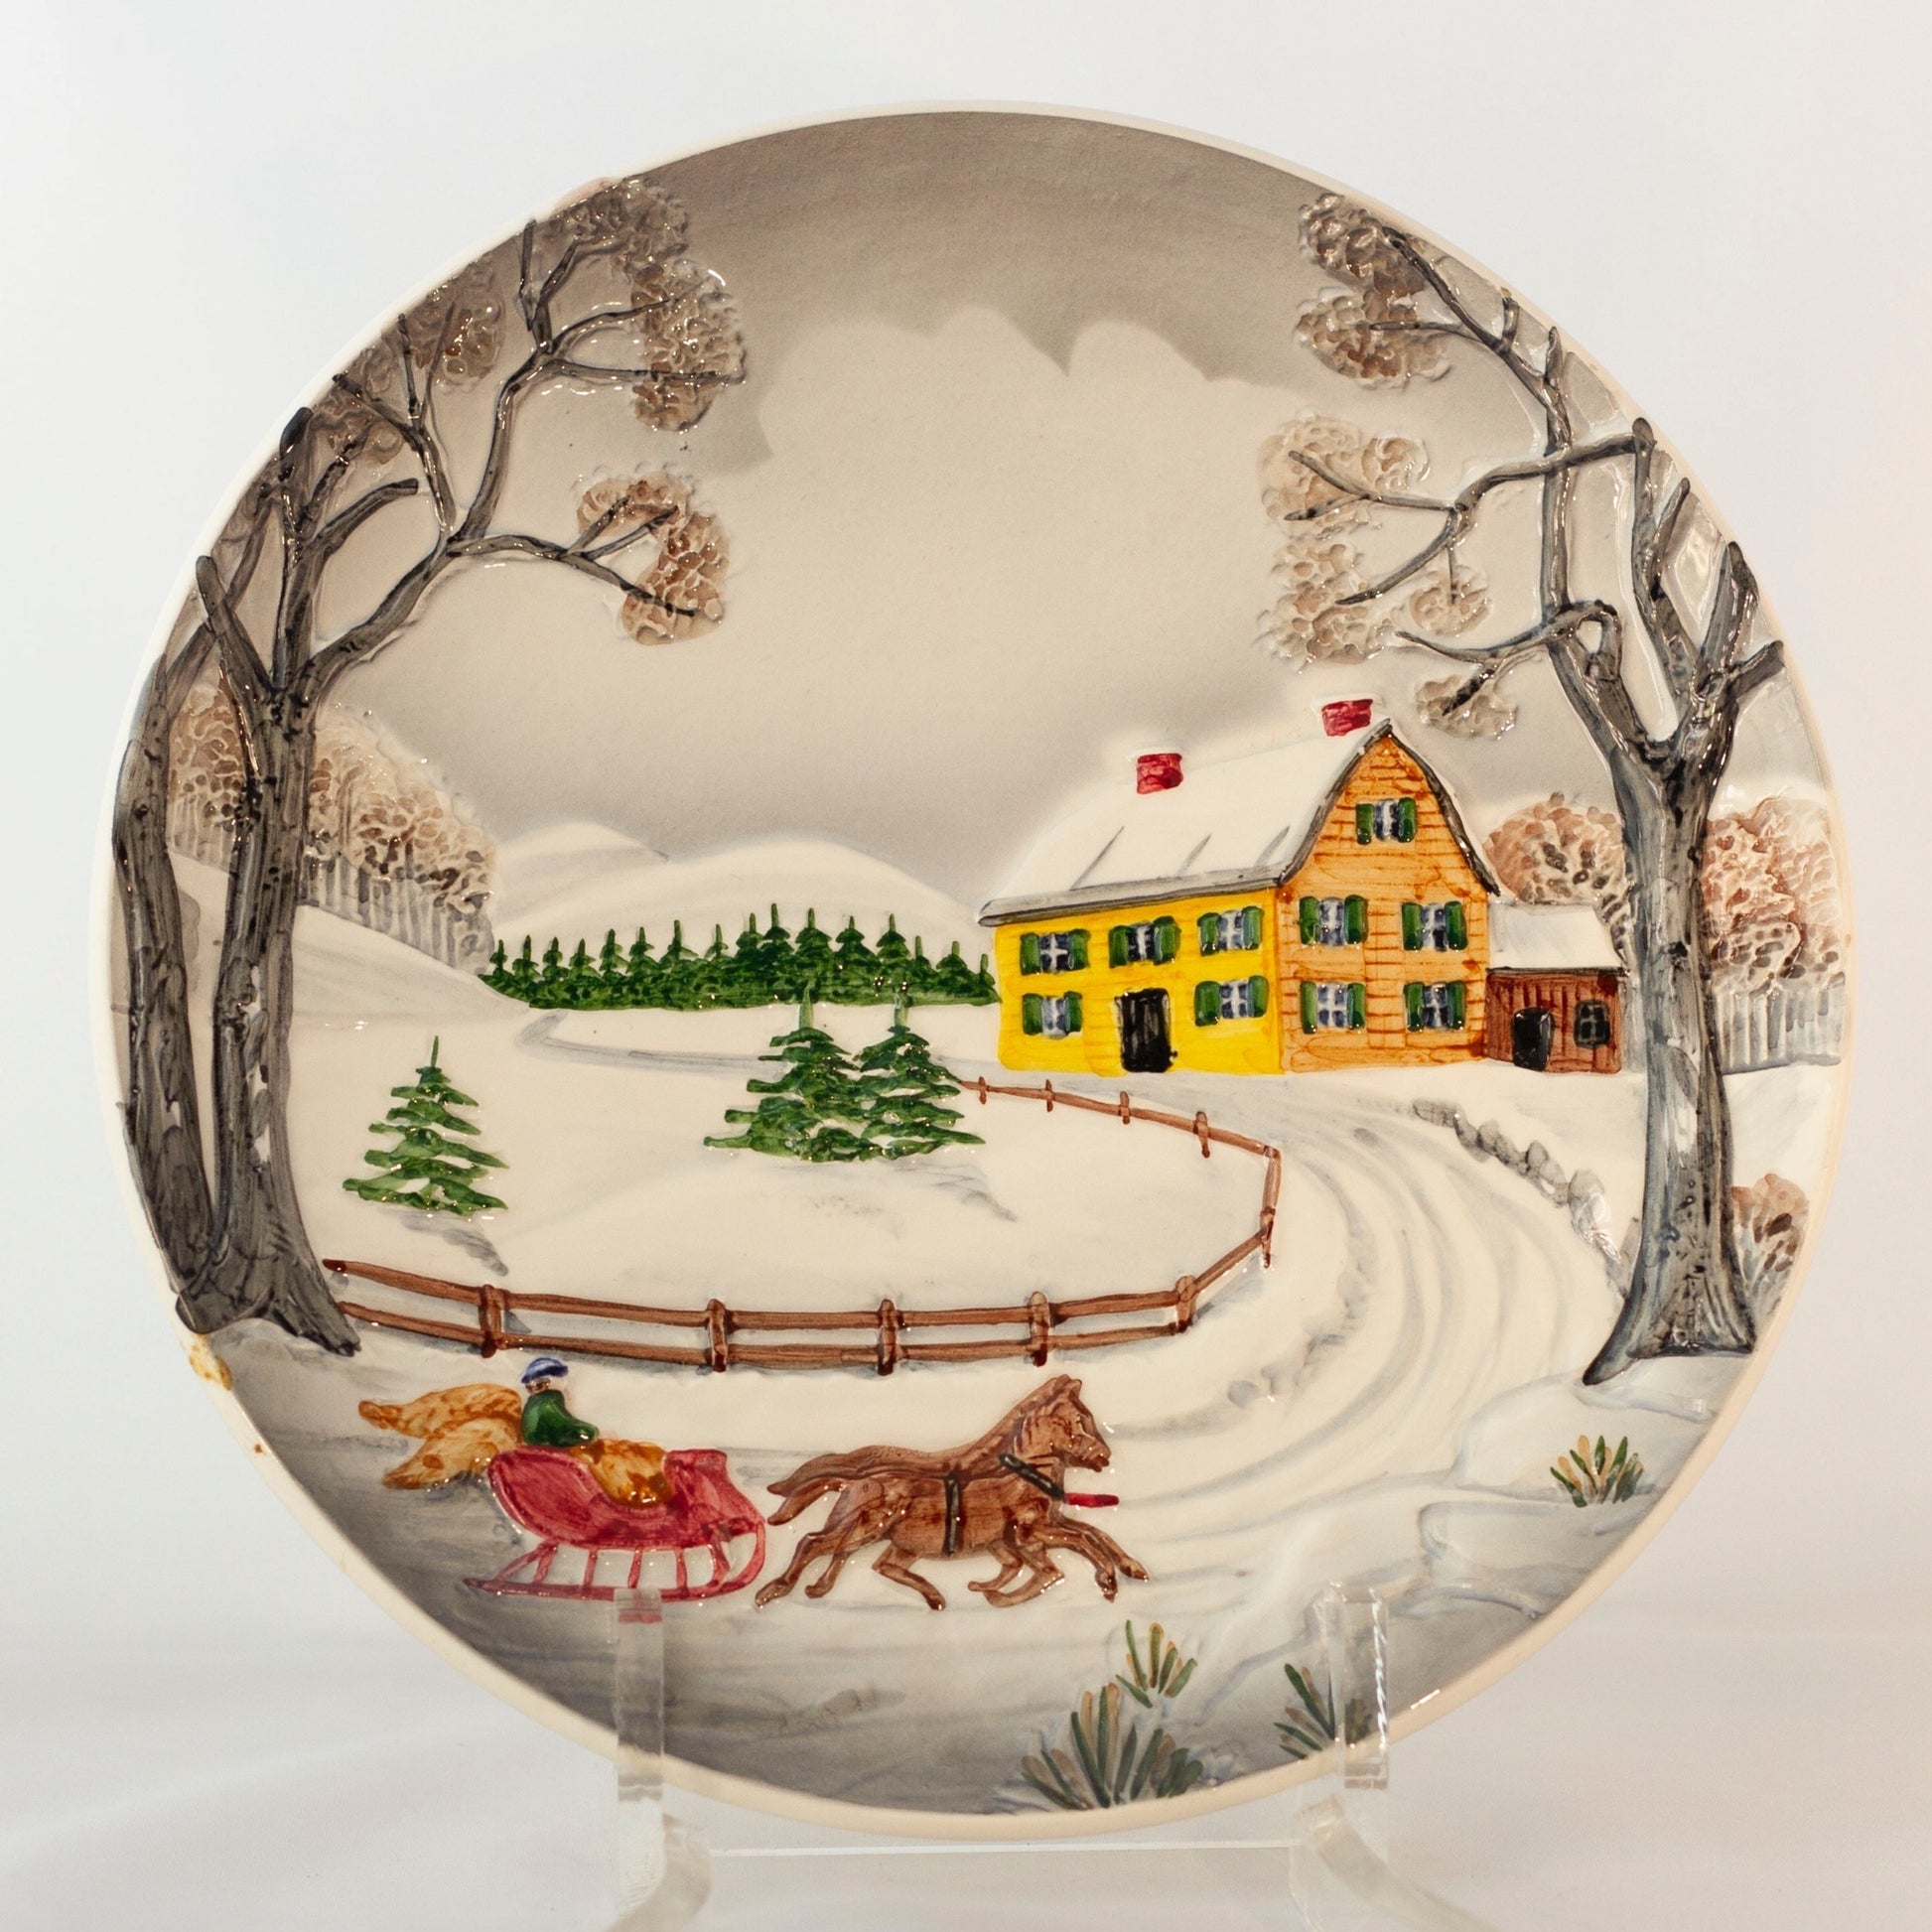 GERMANY CERAMIC PLATE Hand Painted Snowy Winter Sleigh Ride Circa 1950s